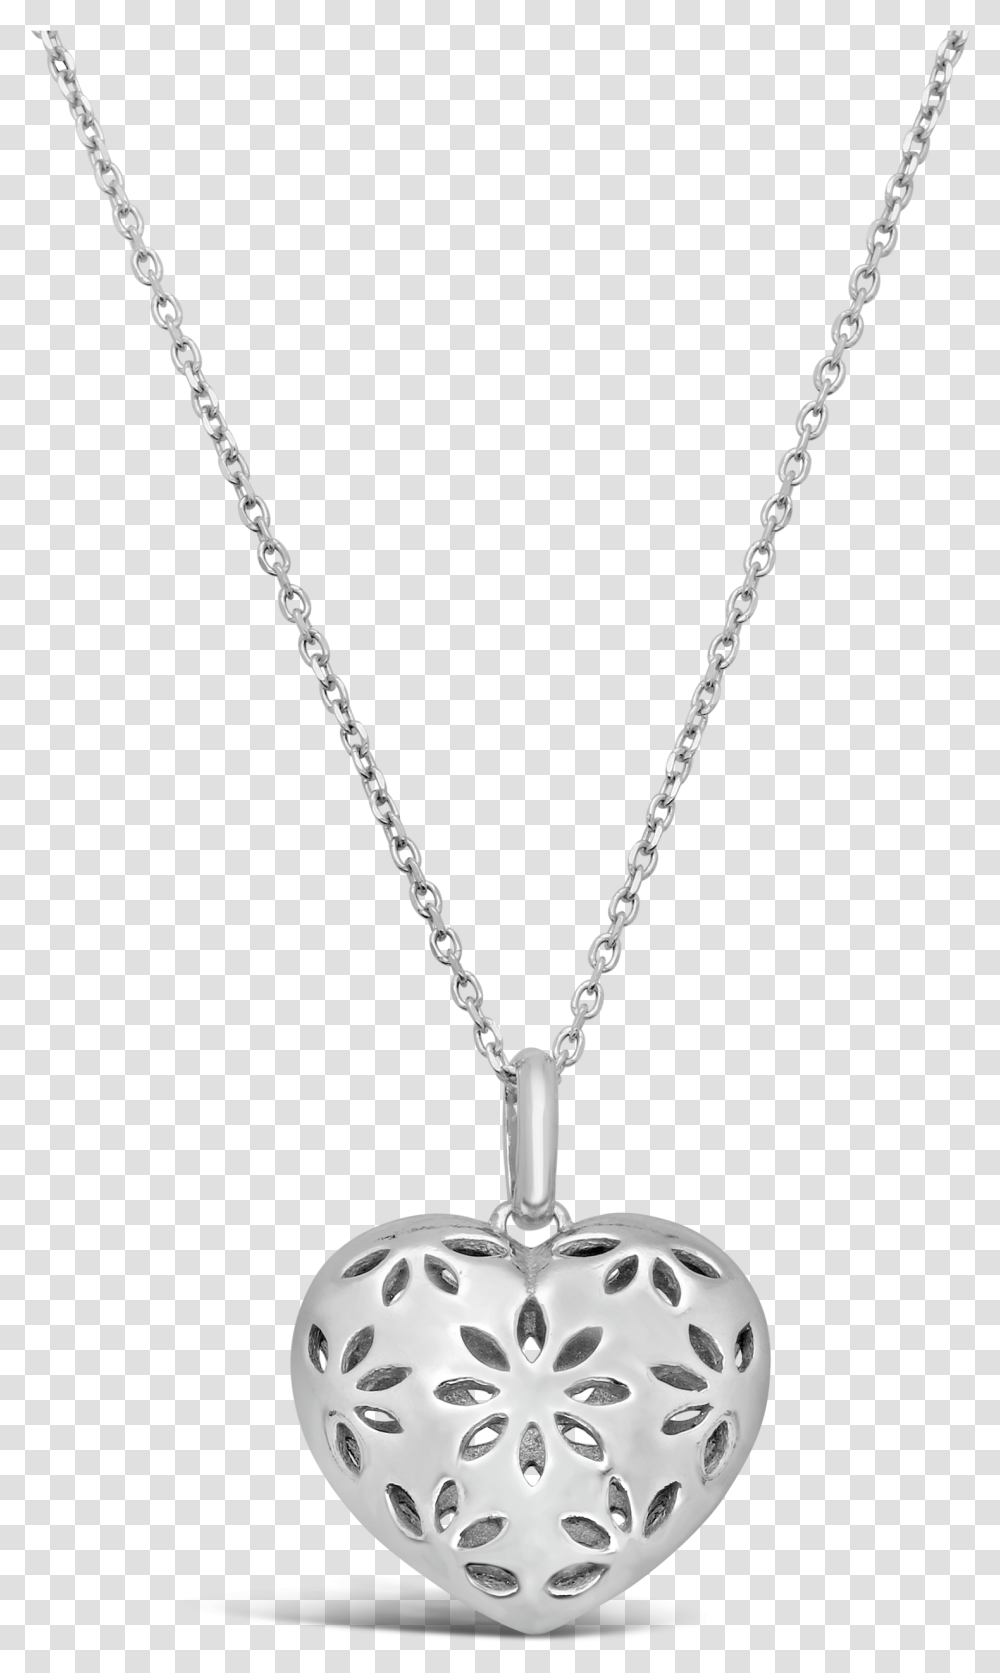 Olaf Clipart Black And White Olaf Jewelry, Necklace, Accessories, Accessory, Pendant Transparent Png